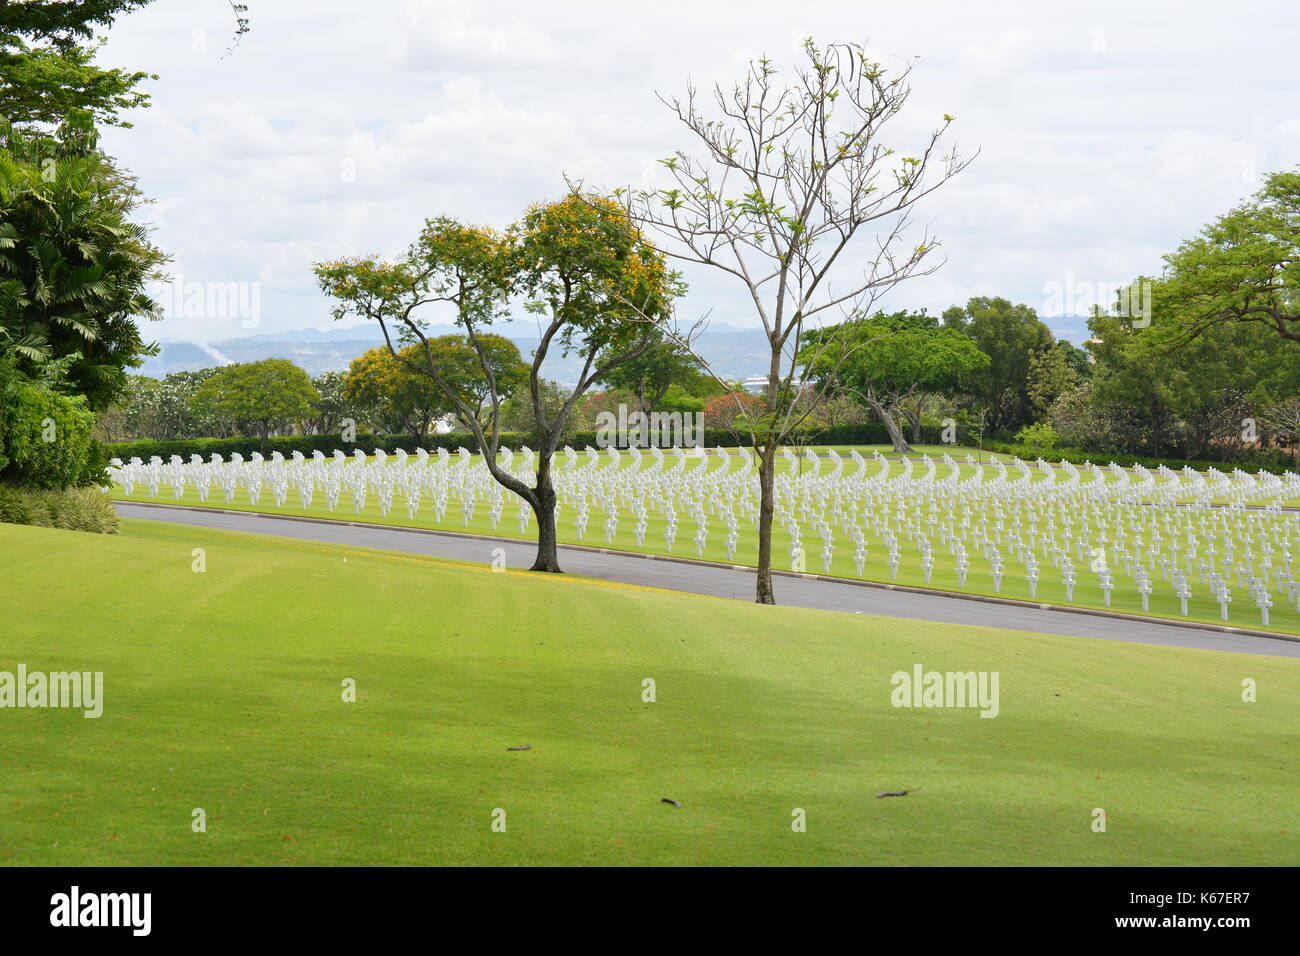 MANILA, PHILIPPINES - APRIL 1, 2016: Manila American Cemetery and Memorial. With 17,206 graves it is the largest WWII cemetery for US personnel. Stock Photo